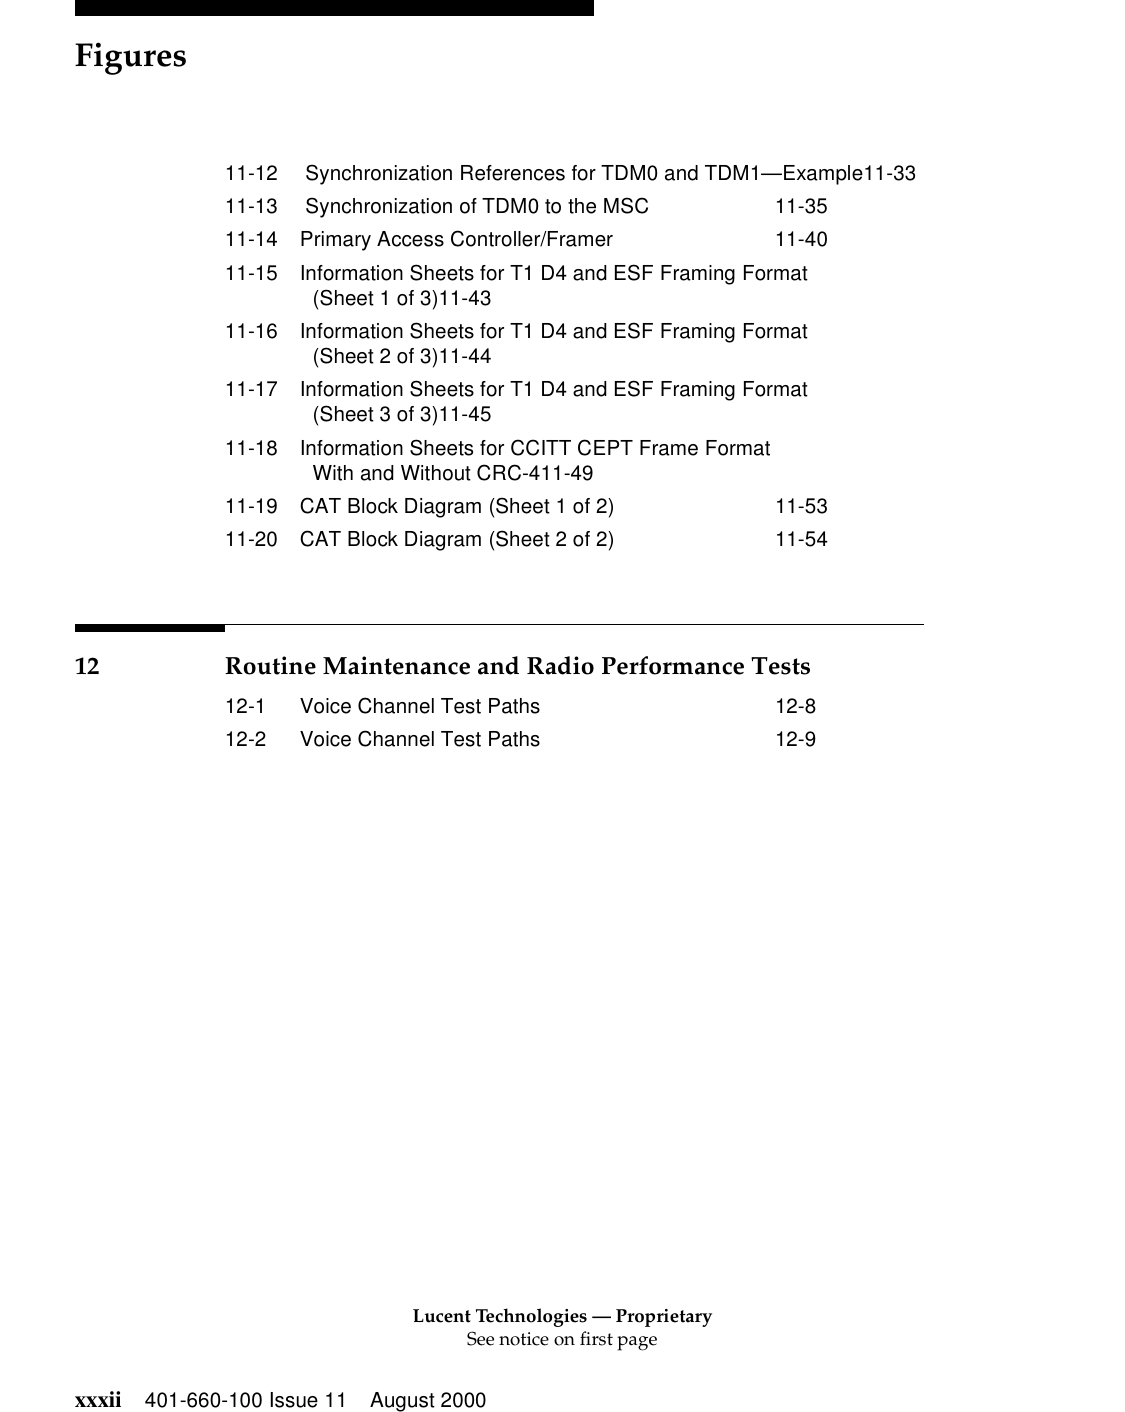 Lucent Technologies — ProprietarySee notice on first pageFiguresxxxii 401-660-100 Issue 11 August 200011-12  Synchronization References for TDM0 and TDM1—Example11-3311-13  Synchronization of TDM0 to the MSC 11-3511-14 Primary Access Controller/Framer 11-4011-15 Information Sheets for T1 D4 and ESF Framing Format (Sheet 1 of 3)11-4311-16 Information Sheets for T1 D4 and ESF Framing Format (Sheet 2 of 3)11-4411-17 Information Sheets for T1 D4 and ESF Framing Format (Sheet 3 of 3)11-4511-18 Information Sheets for CCITT CEPT Frame FormatWith and Without CRC-411-4911-19 CAT Block Diagram (Sheet 1 of 2) 11-5311-20 CAT Block Diagram (Sheet 2 of 2) 11-5412 Routine Maintenance and Radio Performance Tests12-1 Voice Channel Test Paths 12-812-2 Voice Channel Test Paths 12-9